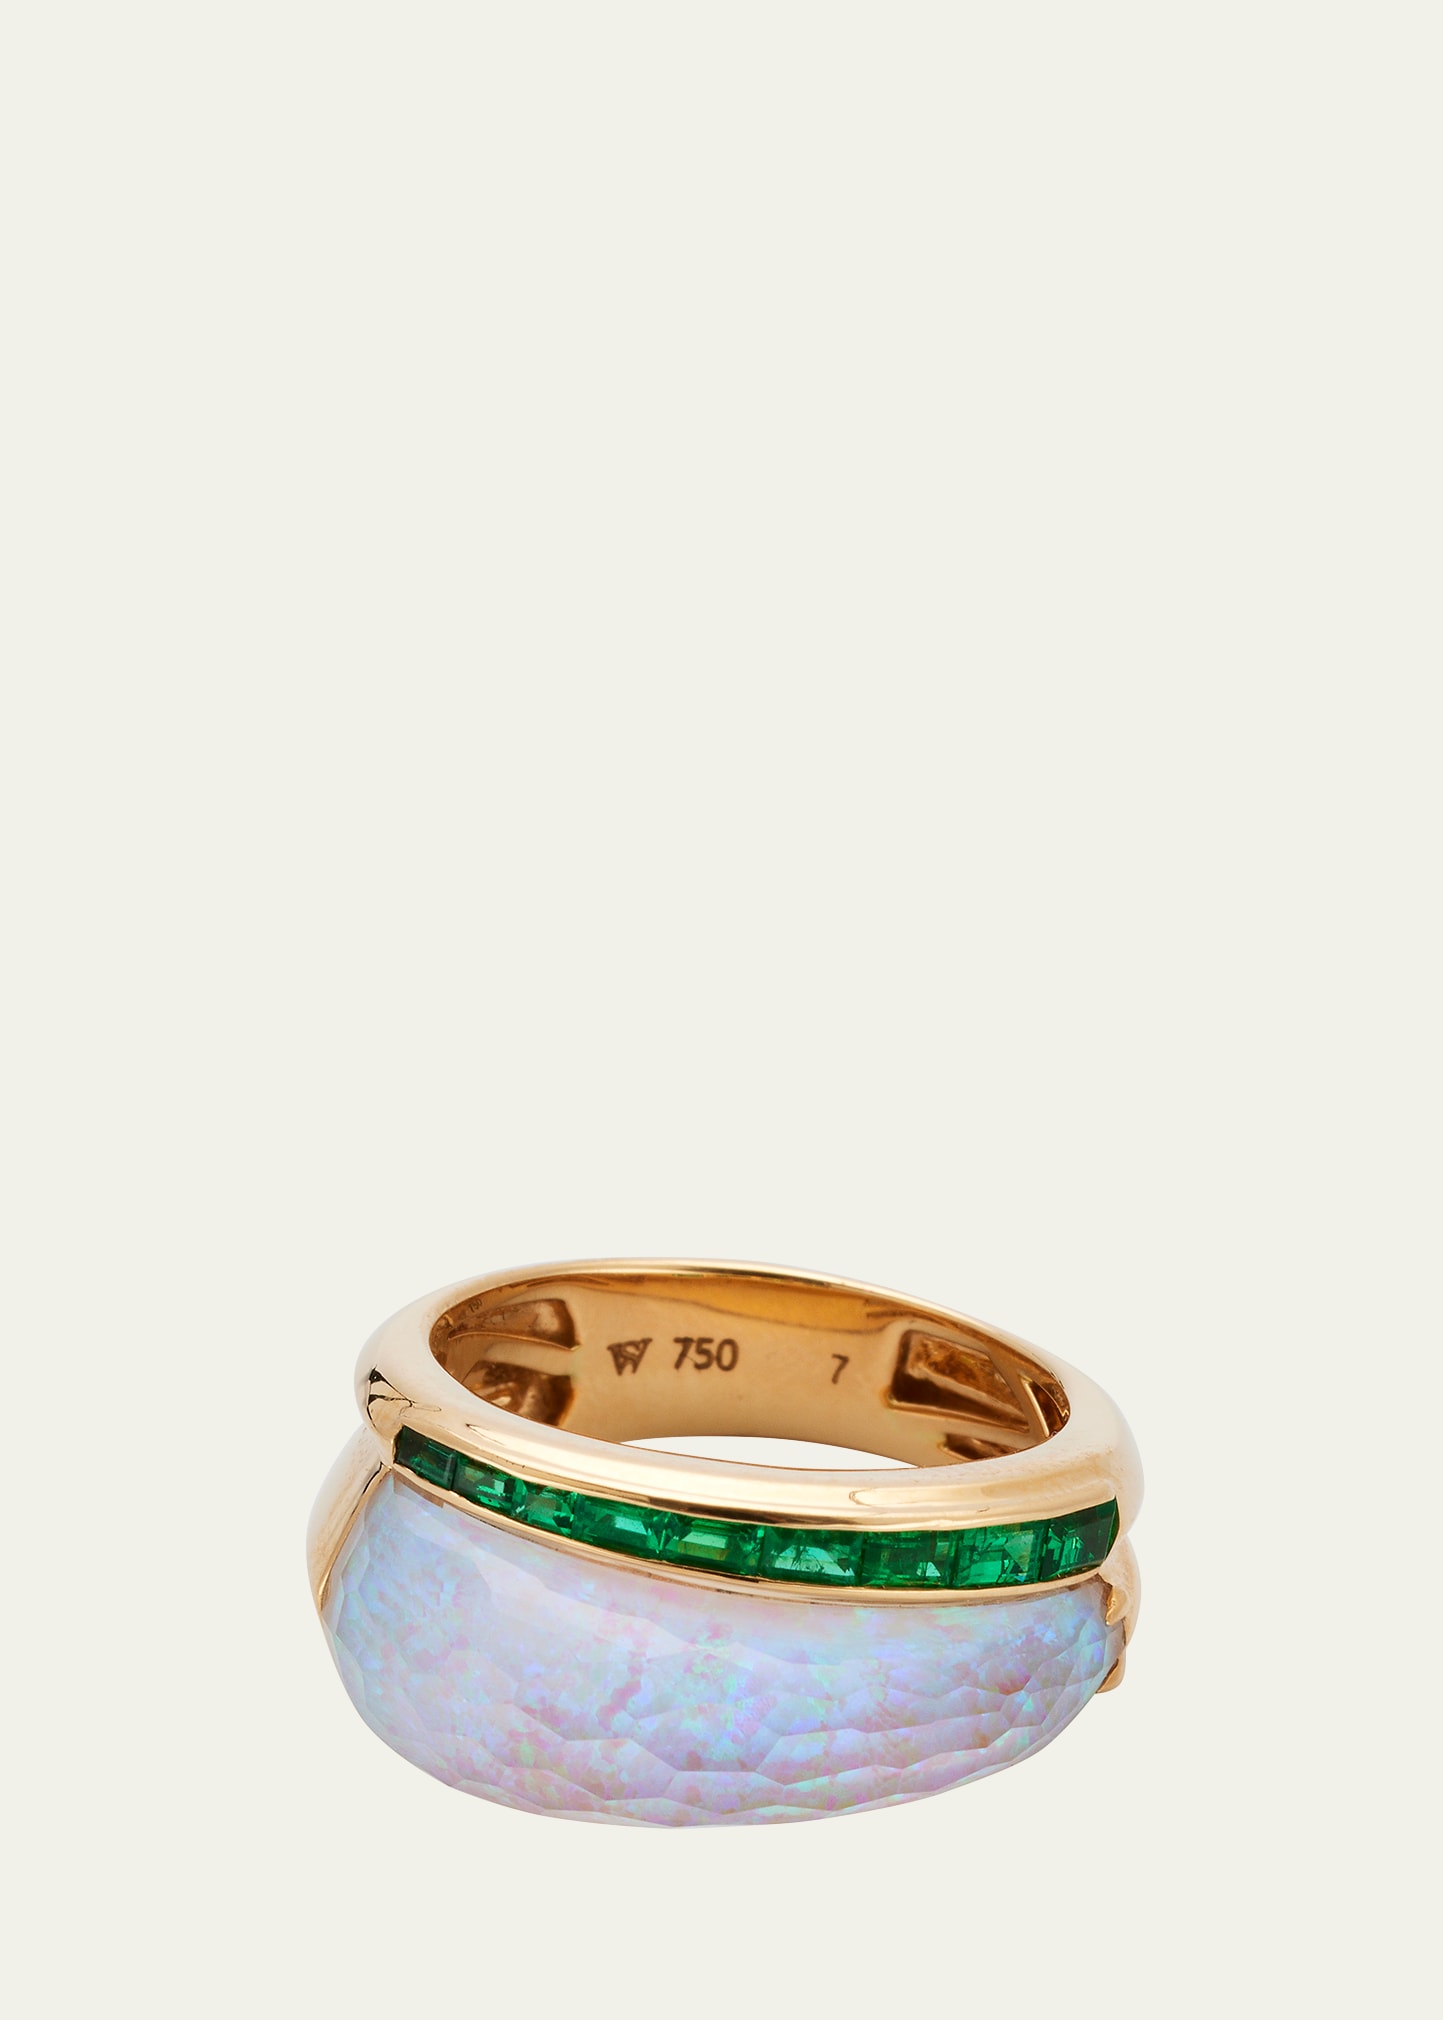 STEPHEN WEBSTER 18K YELLOW GOLD CH2 SLIMLINE RING WITH OPALESCENT QUARTZ CRYSTAL HAZE AND EMERALDS